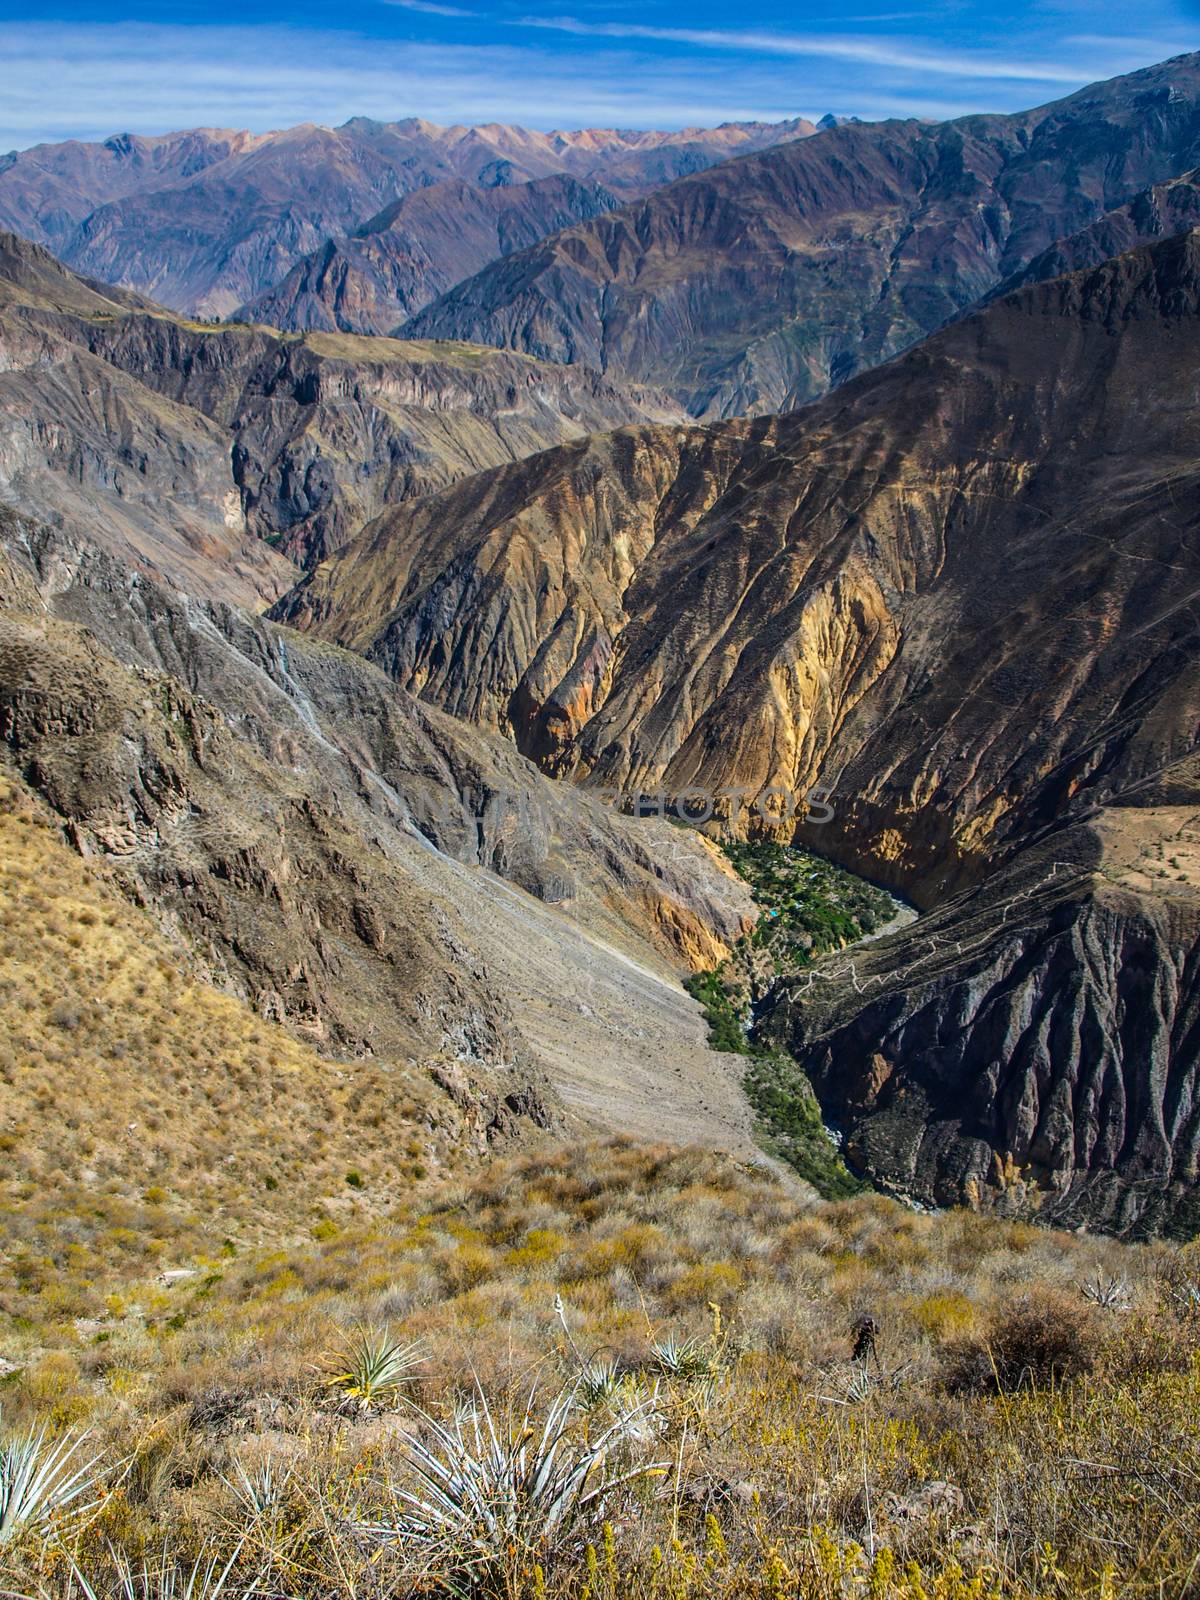 The deepest canyon in the world - Colca (Peru)